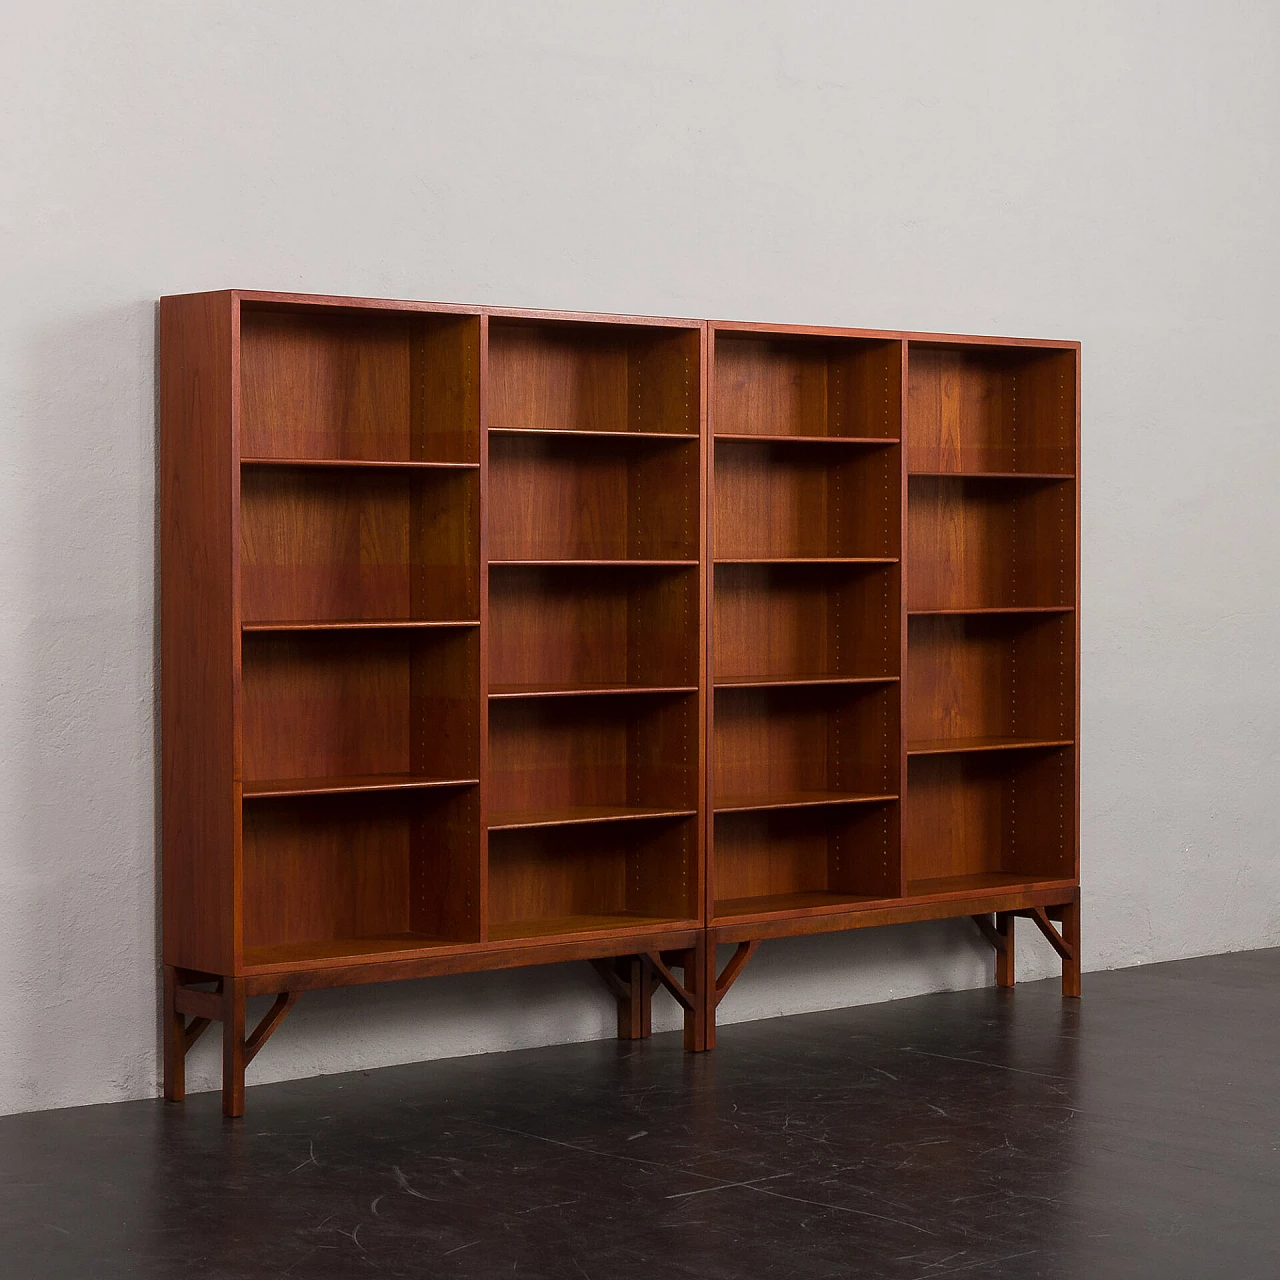 China bookcase by Børge Mogensen for C. M. Madsen, 1960s 4